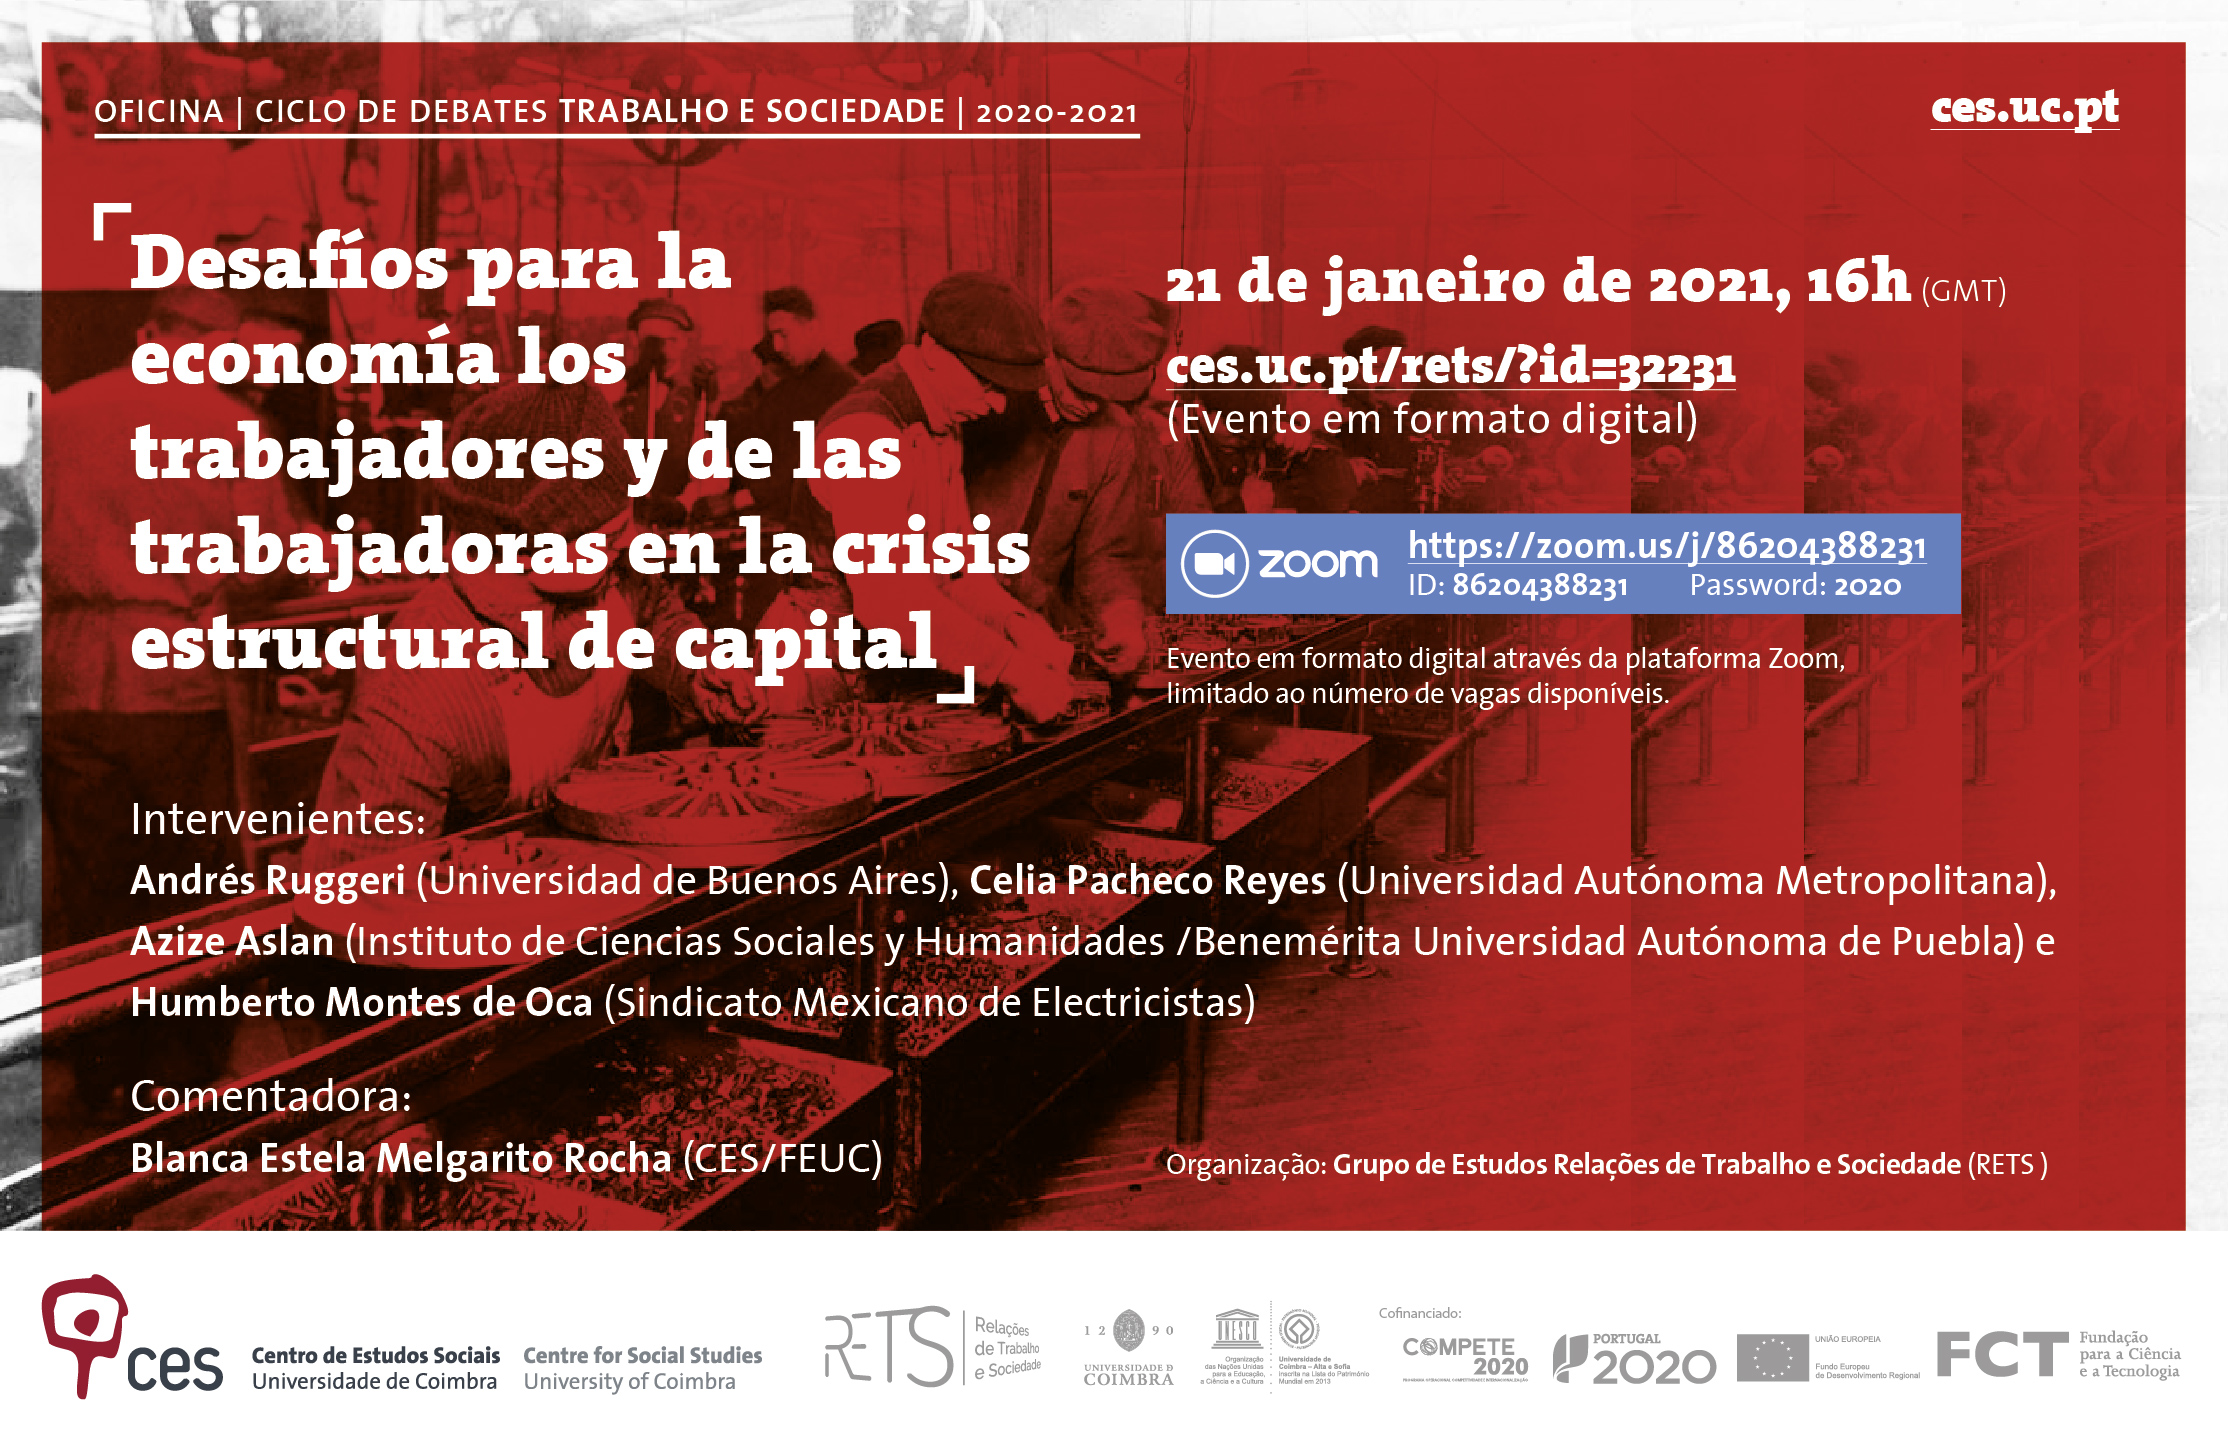 Challenges for the workers' economy in the structural crisis of capital <span id="edit_32231"><script>$(function() { $('#edit_32231').load( "/myces/user/editobj.php?tipo=evento&id=32231" ); });</script></span>